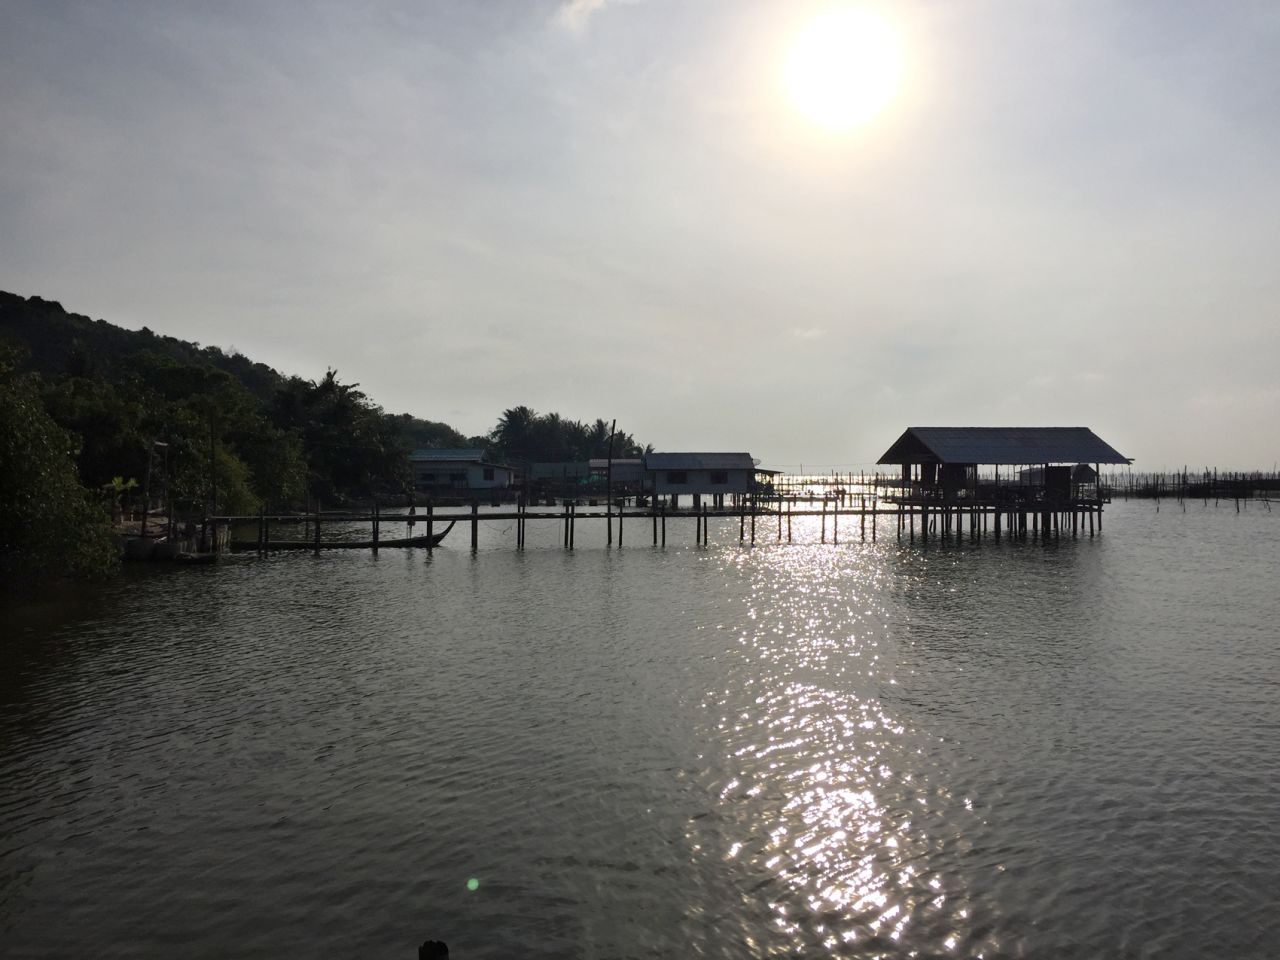 The islet of Koh Yo -- in Songkhla Lake -- is known for its fresh fish and scenic stilt houses.